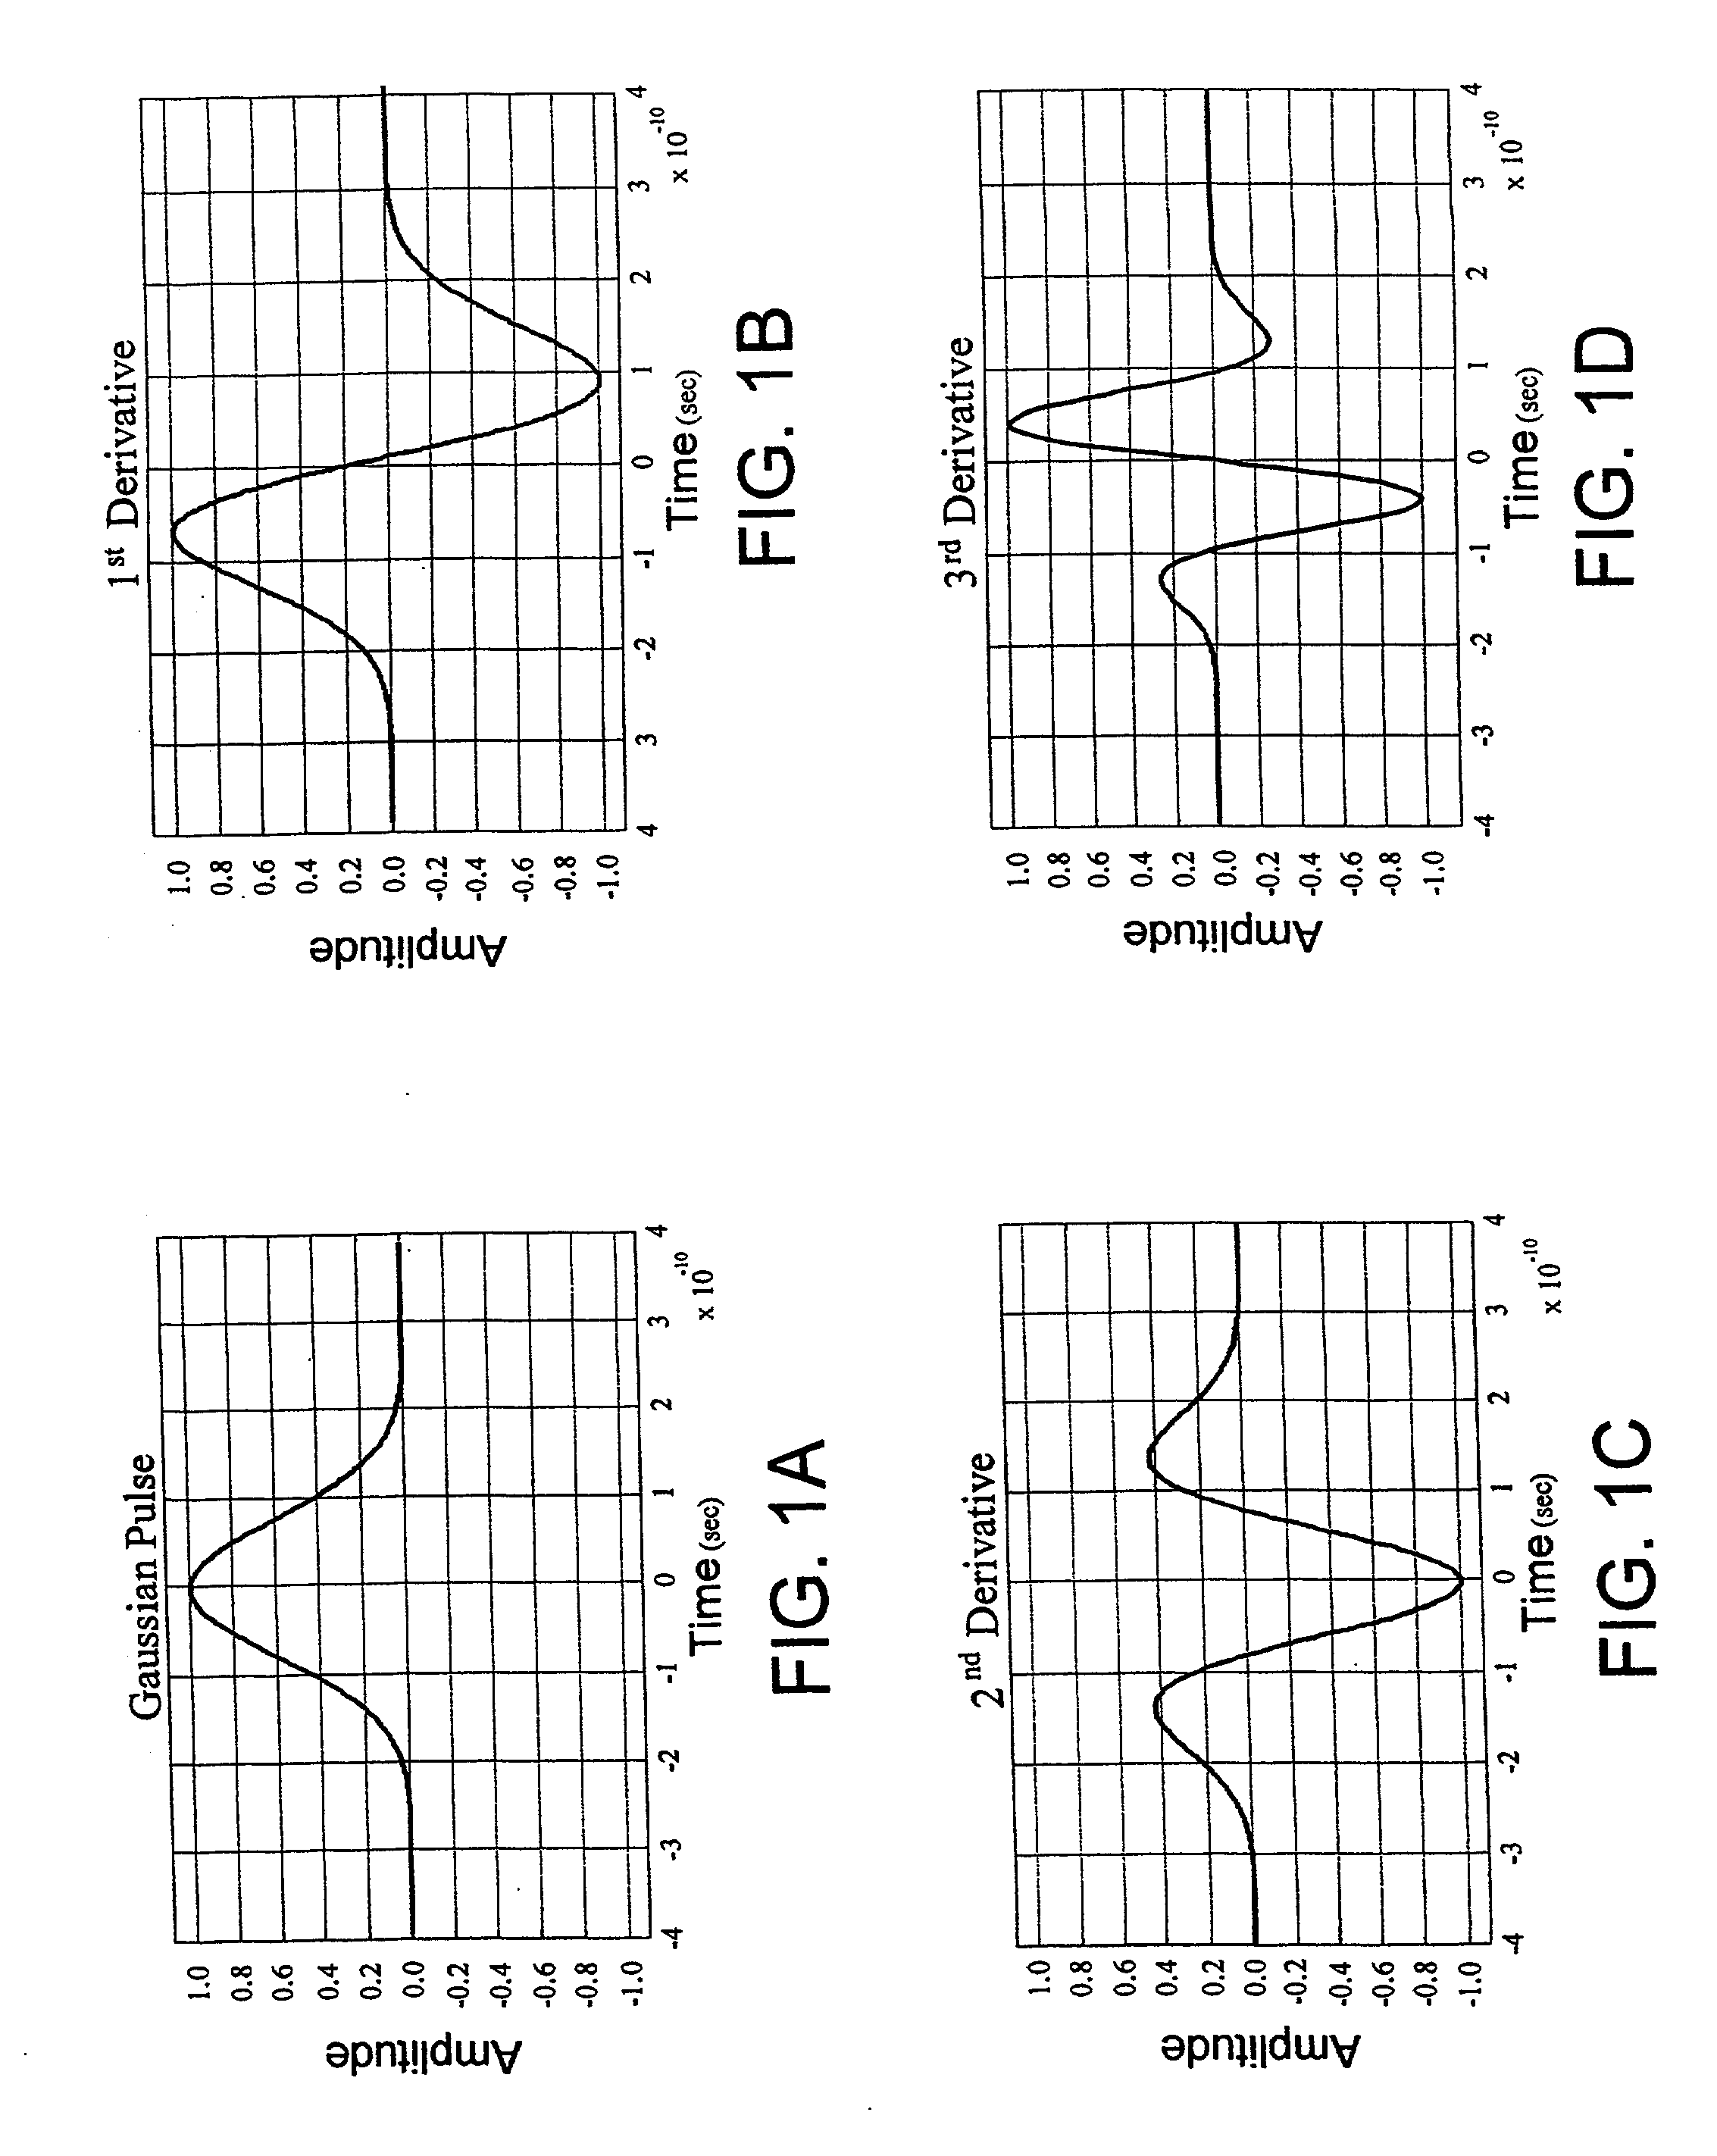 Railroad collision avoidance system and method for preventing train accidents